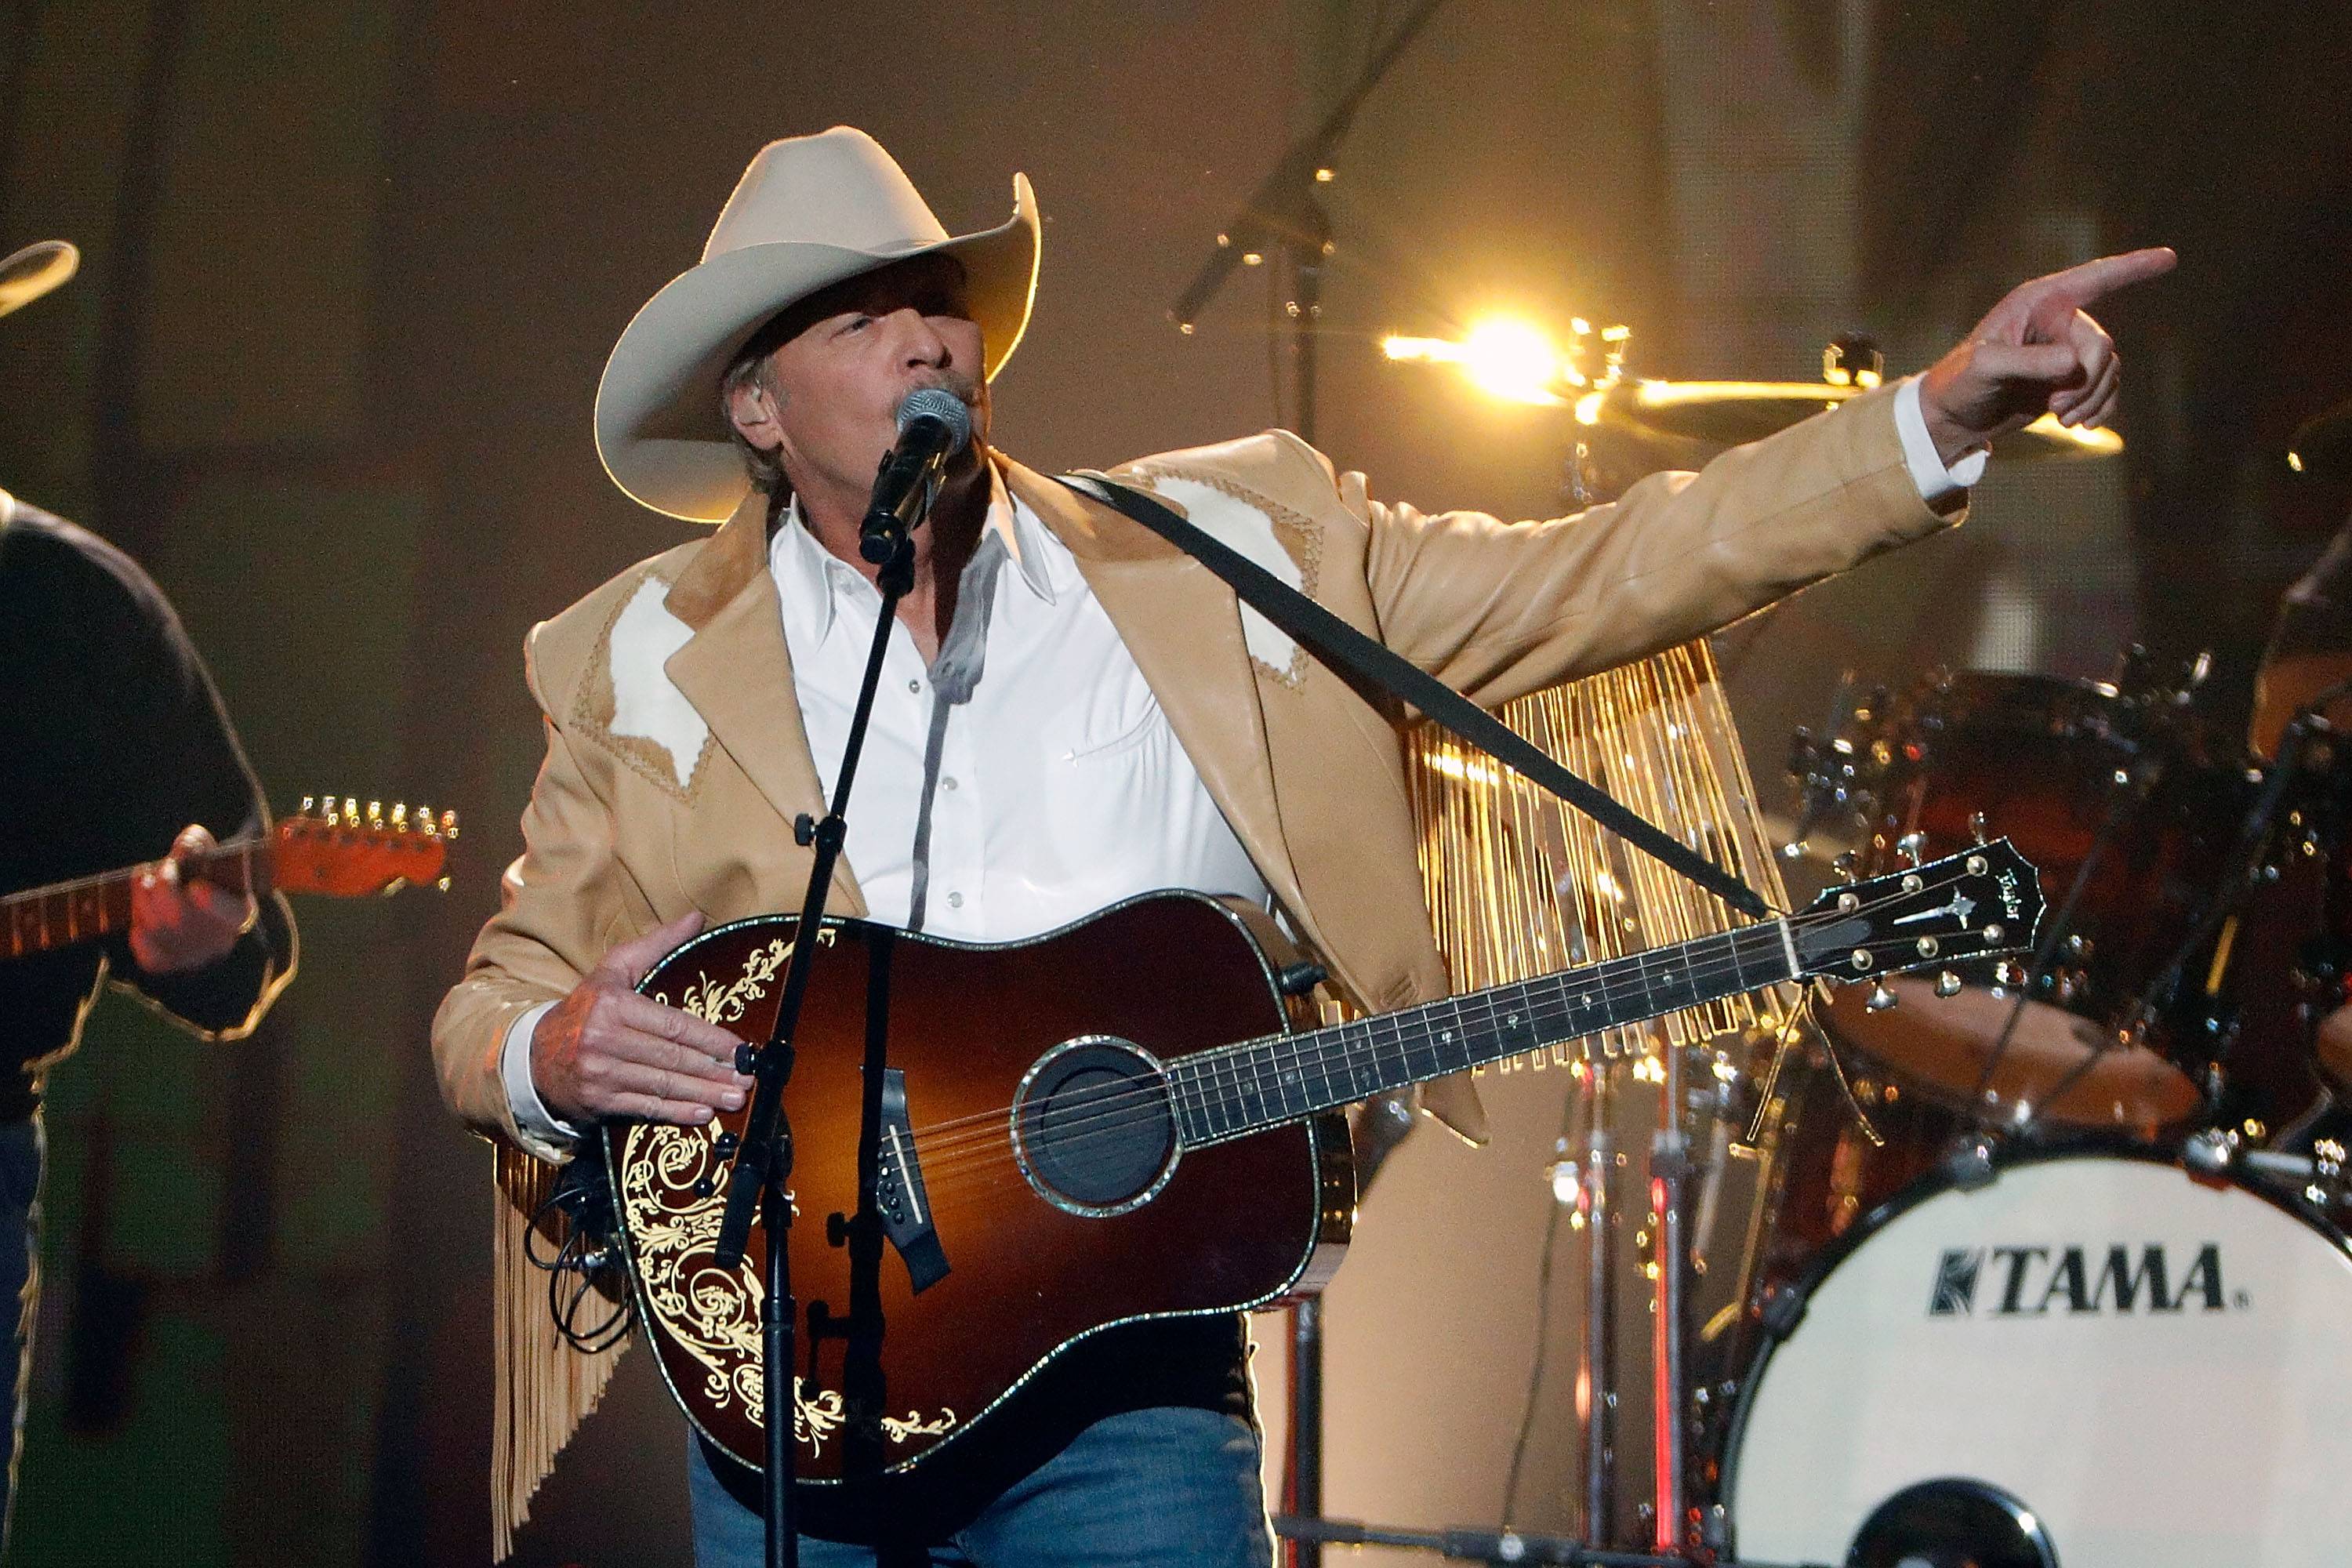 Alan Jackson to launch 'Last Call' tour in June 